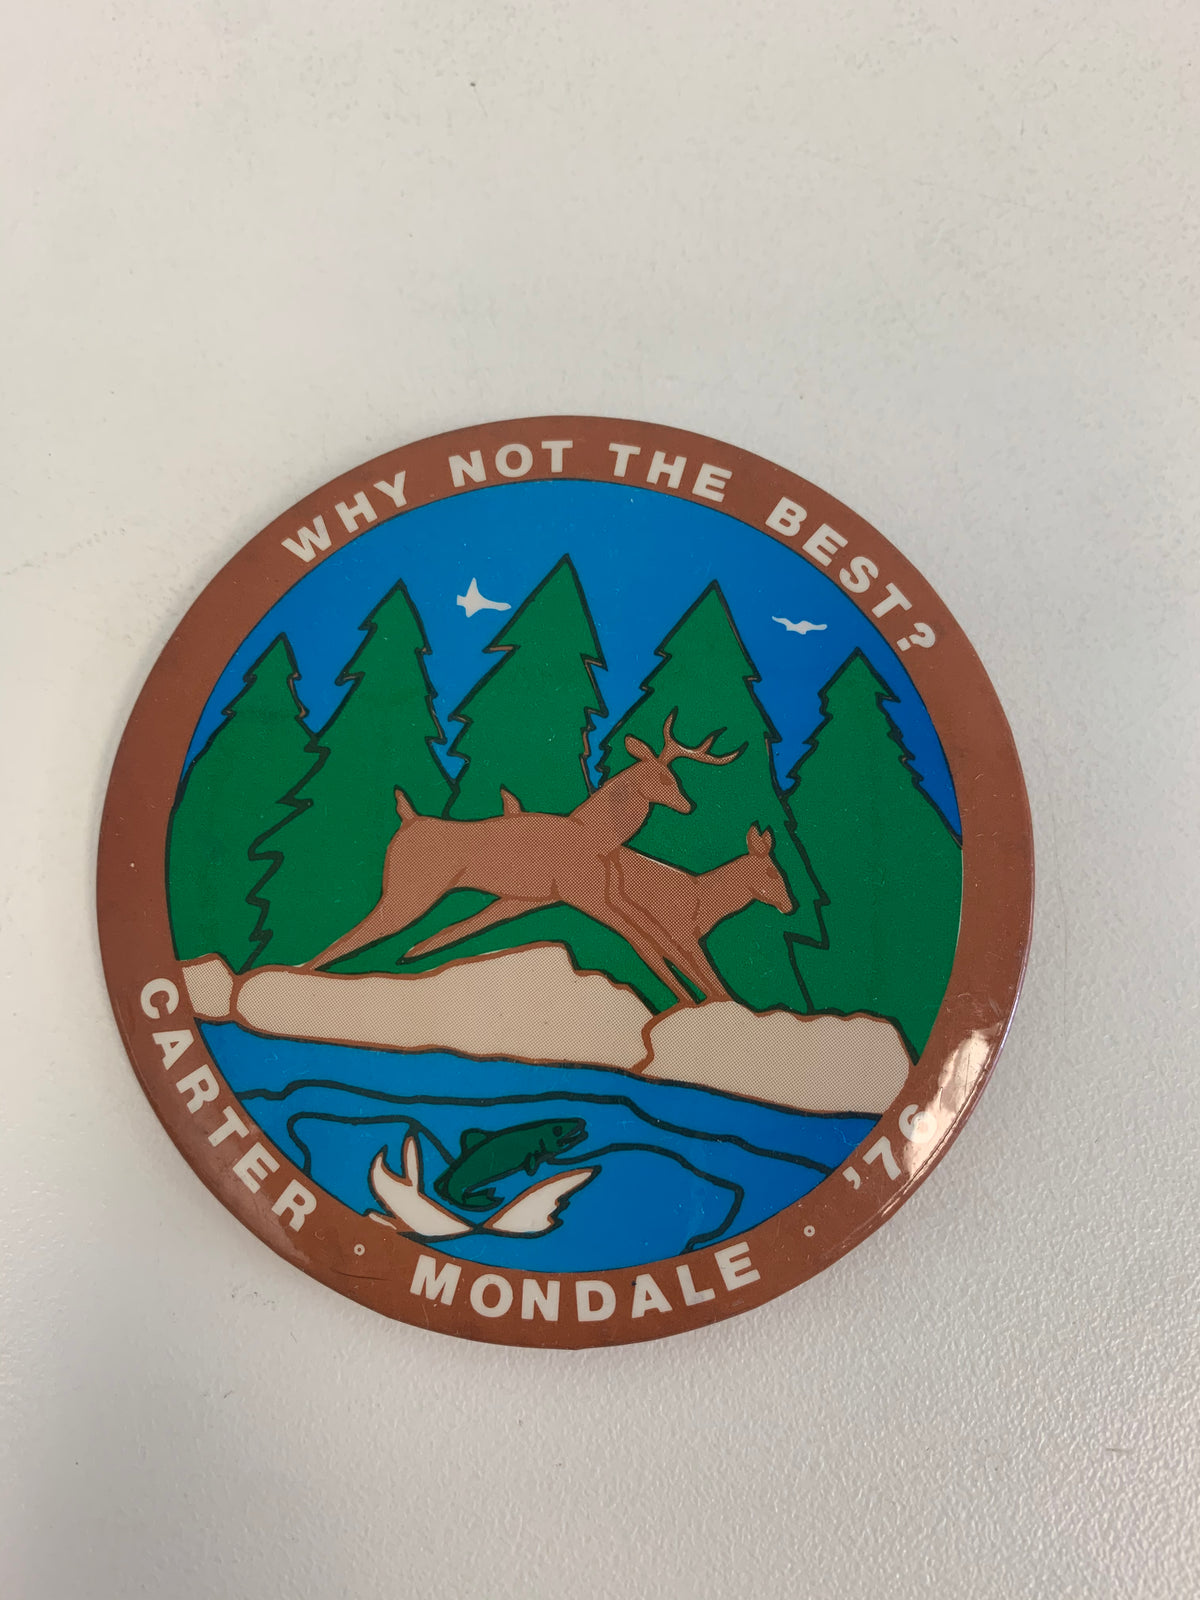 Why Not the Best? Carter Mondale 1976 pin